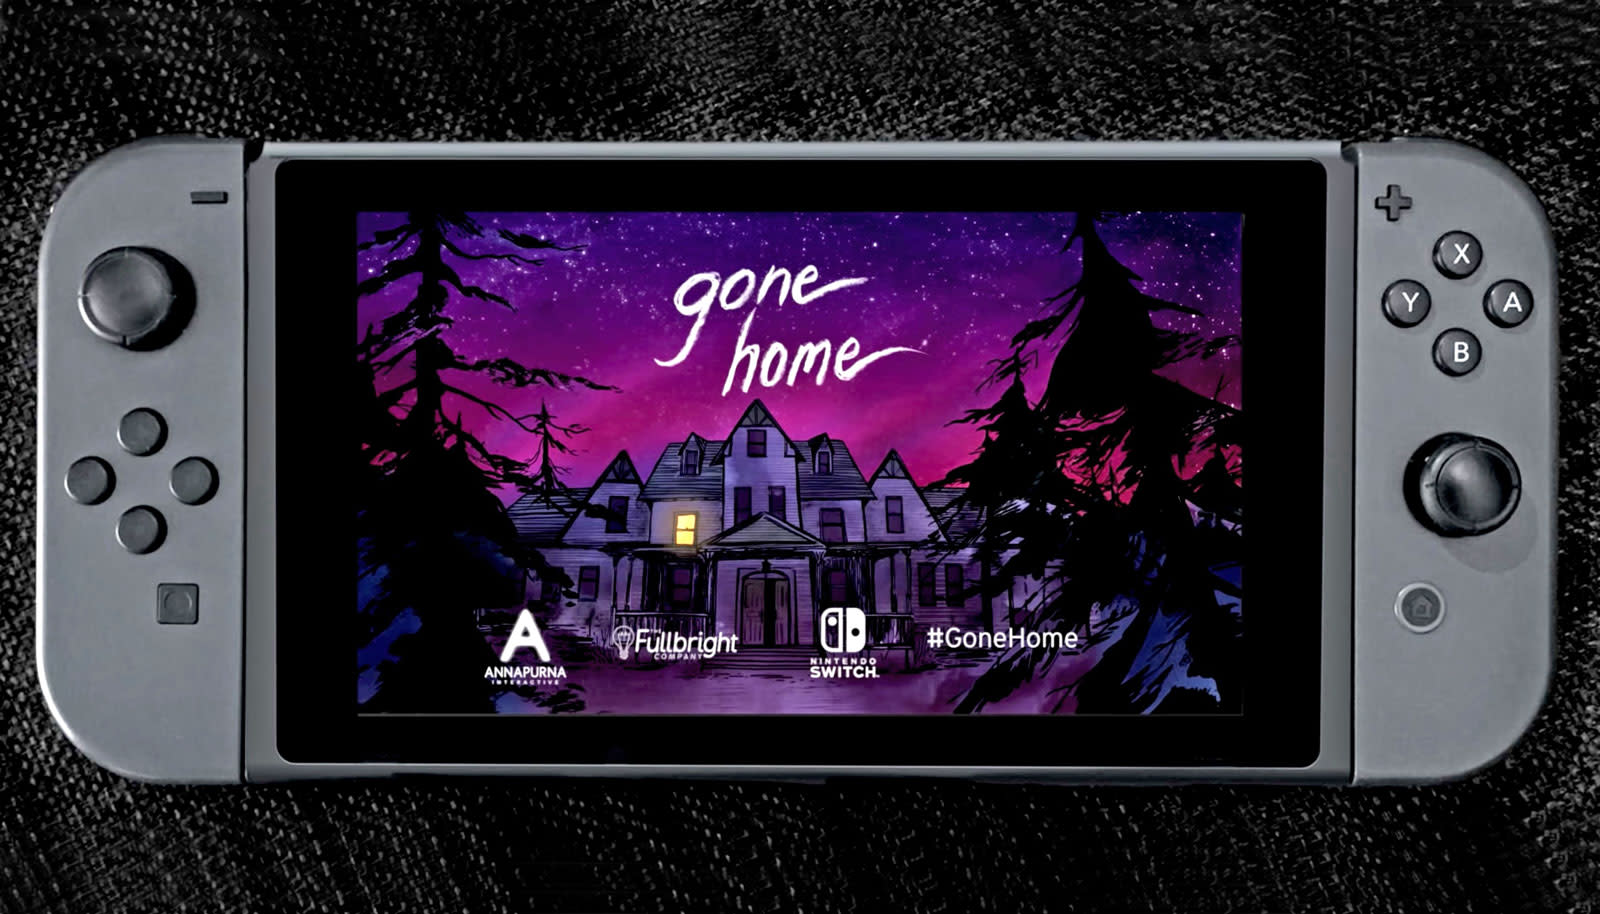 Gone home game. Gone Home игра ps4. Nintendo Switch дом. Gone Home - Console Edition. Fullbright (Company) игры.